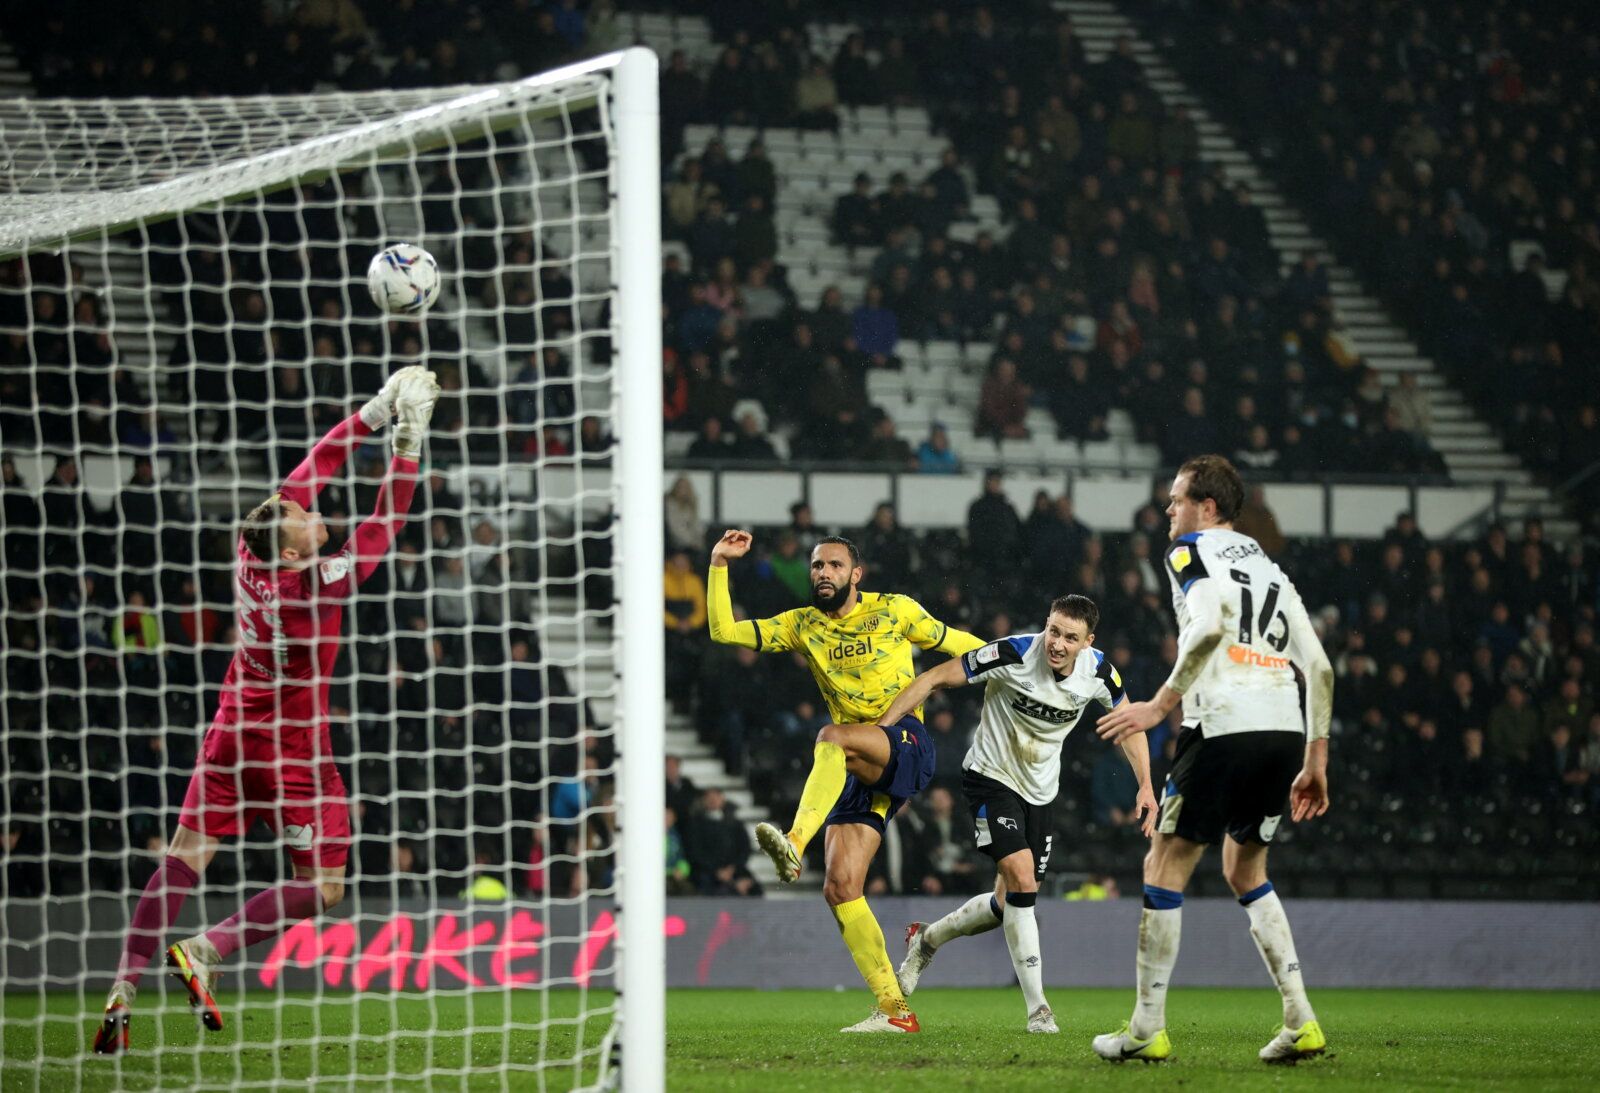 Soccer Football - Championship - Derby County v West Bromwich Albion - Pride Park, Derby, Britain - December 27, 2021 Derby County's Ryan Allsop saves a shot on goal by West Bromwich Albion's Kyle Bartley   Action Images/Molly Darlington  EDITORIAL USE ONLY. No use with unauthorized audio, video, data, fixture lists, club/league logos or 